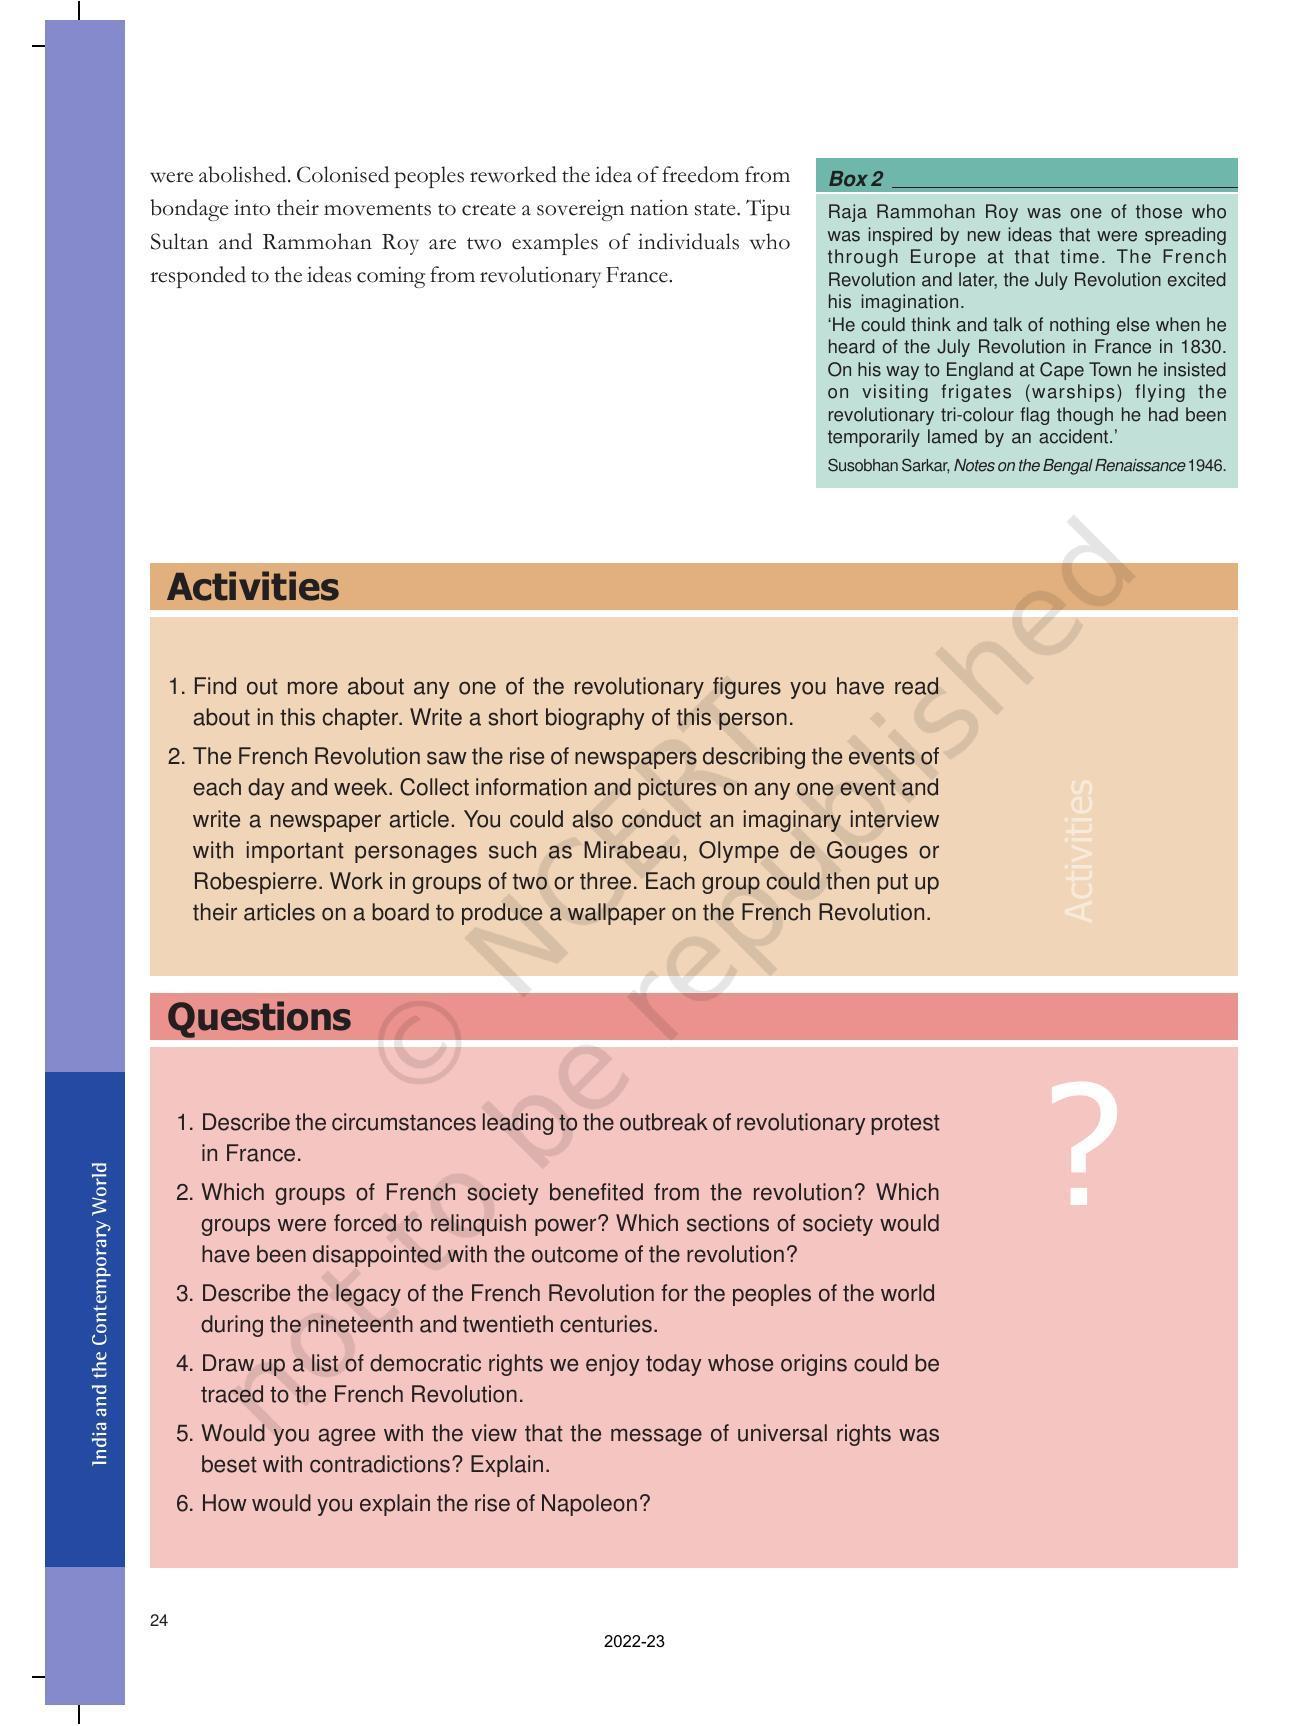 NCERT Book for Class 9 History Chapter 1 The French Revolution - Page 24